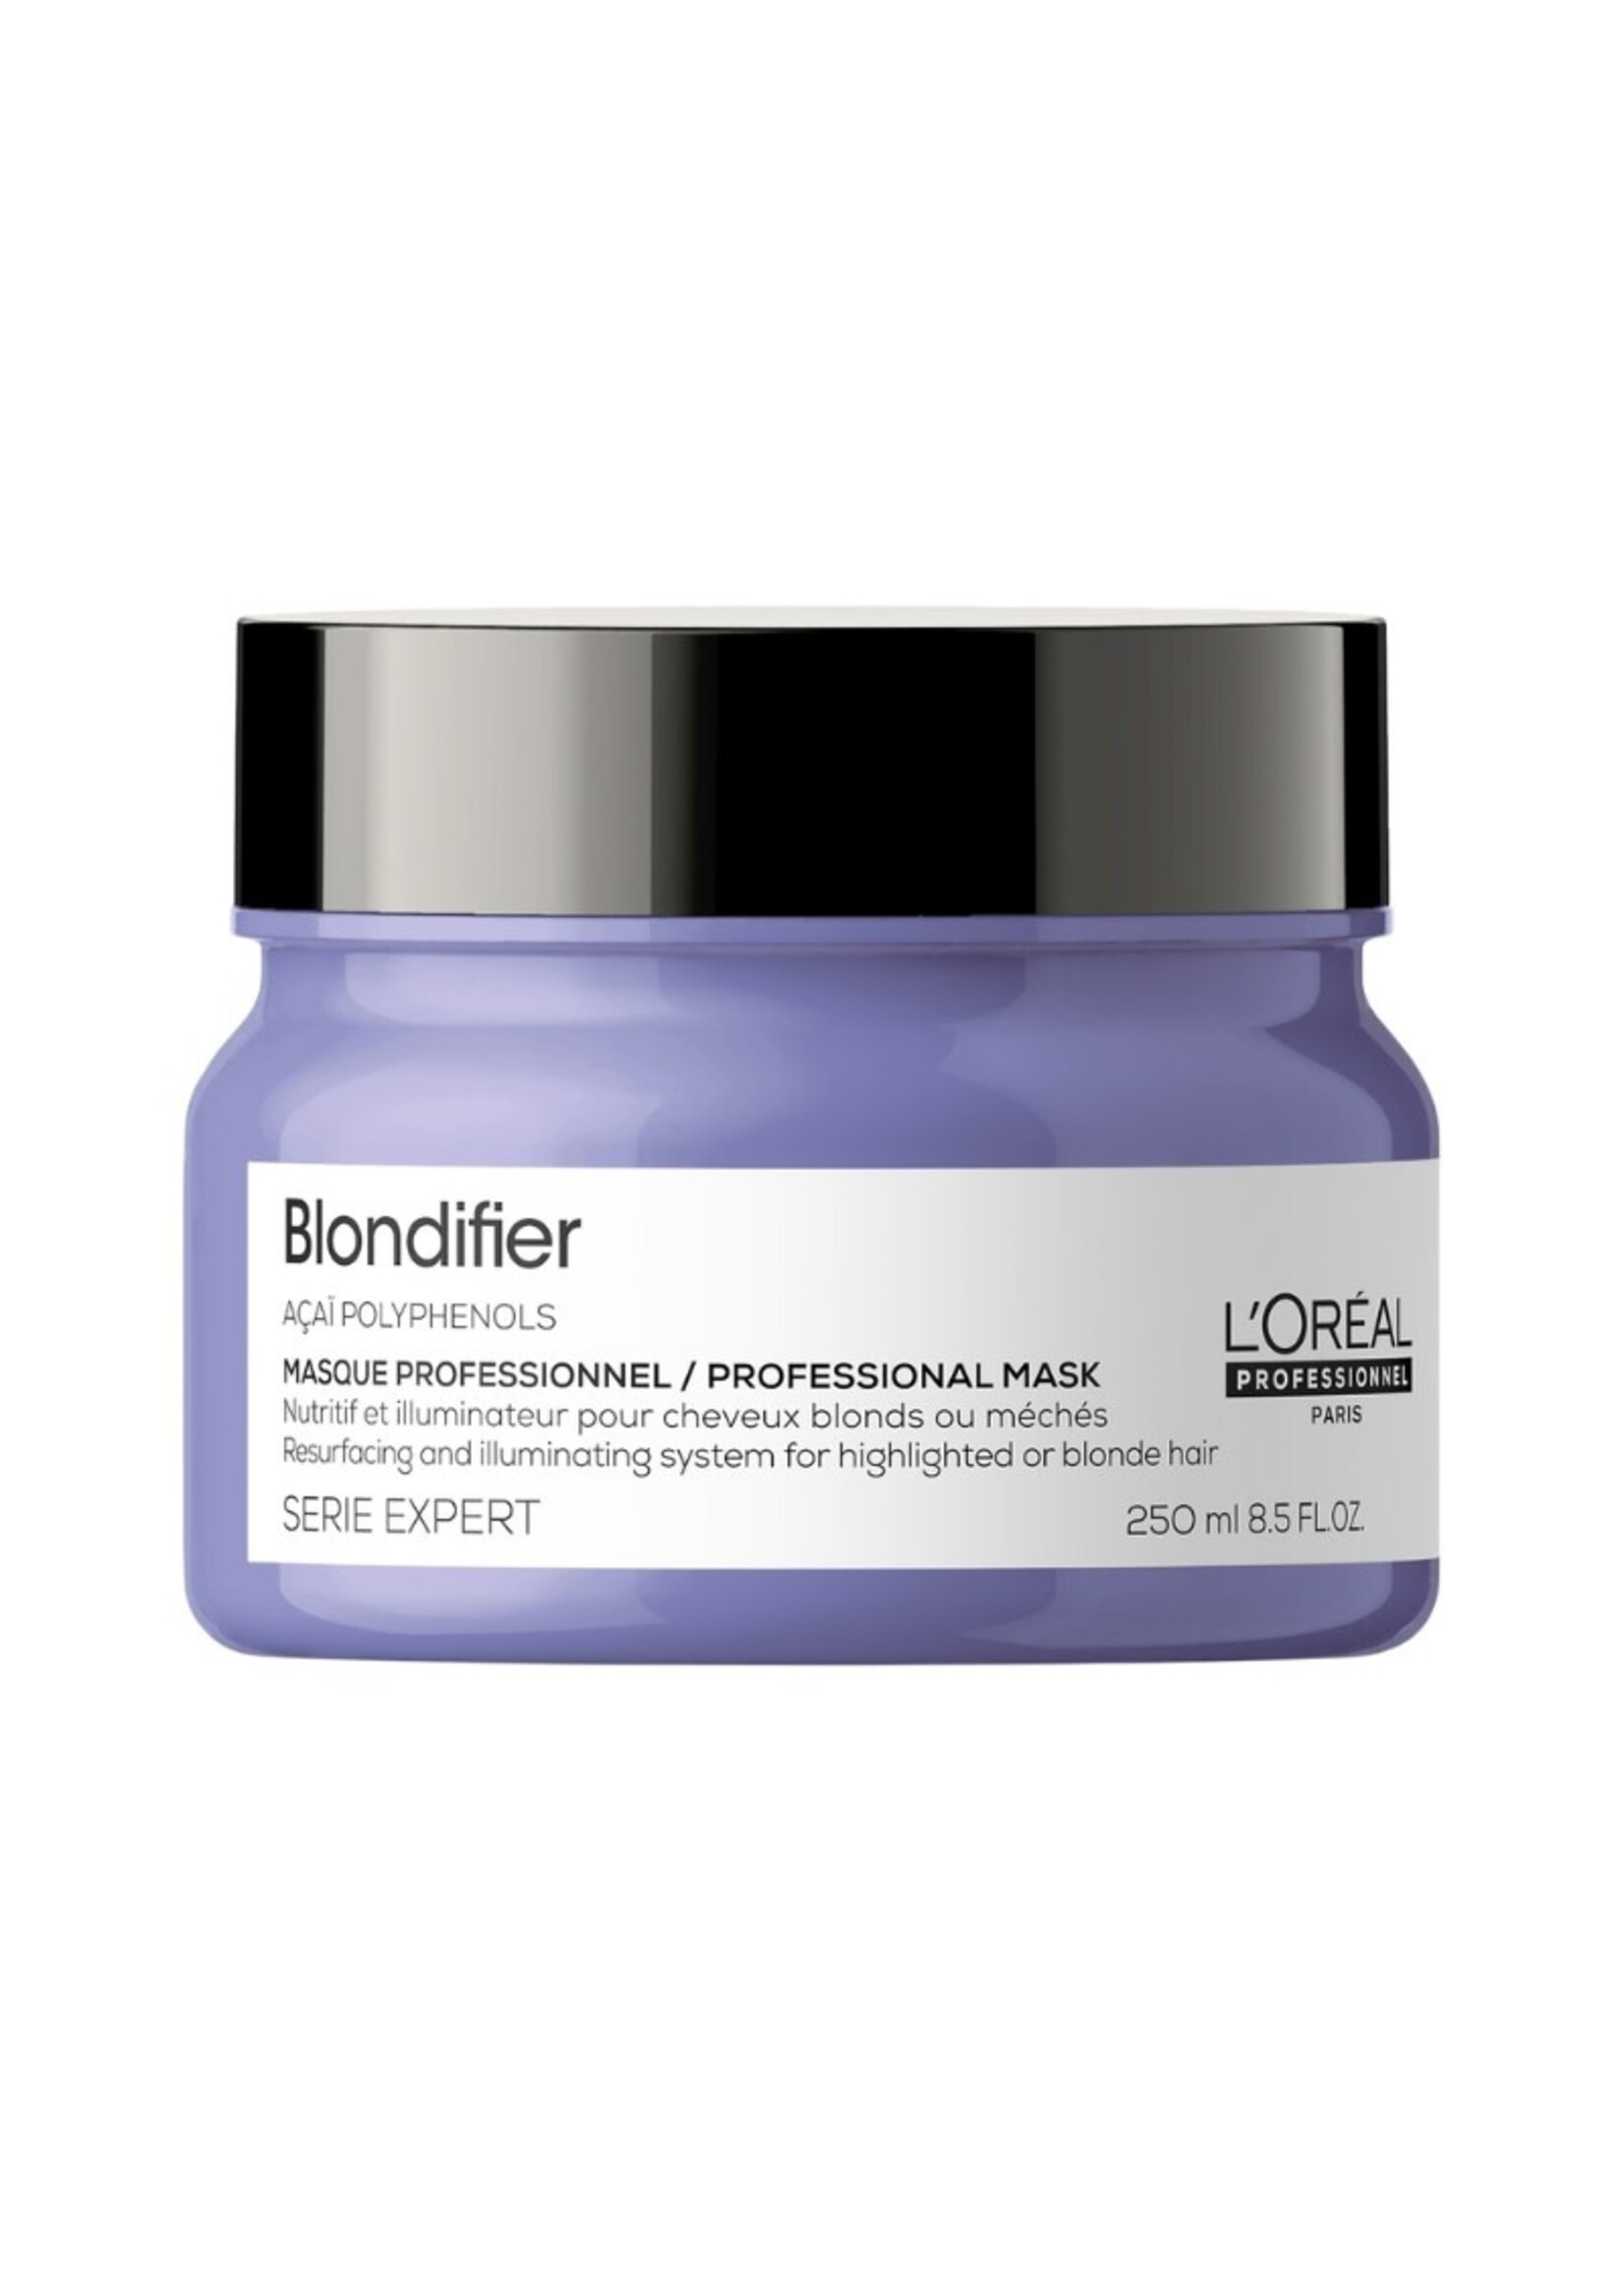 Loreal Professional Loreal Serie Expert Blondifier Mask 250mL